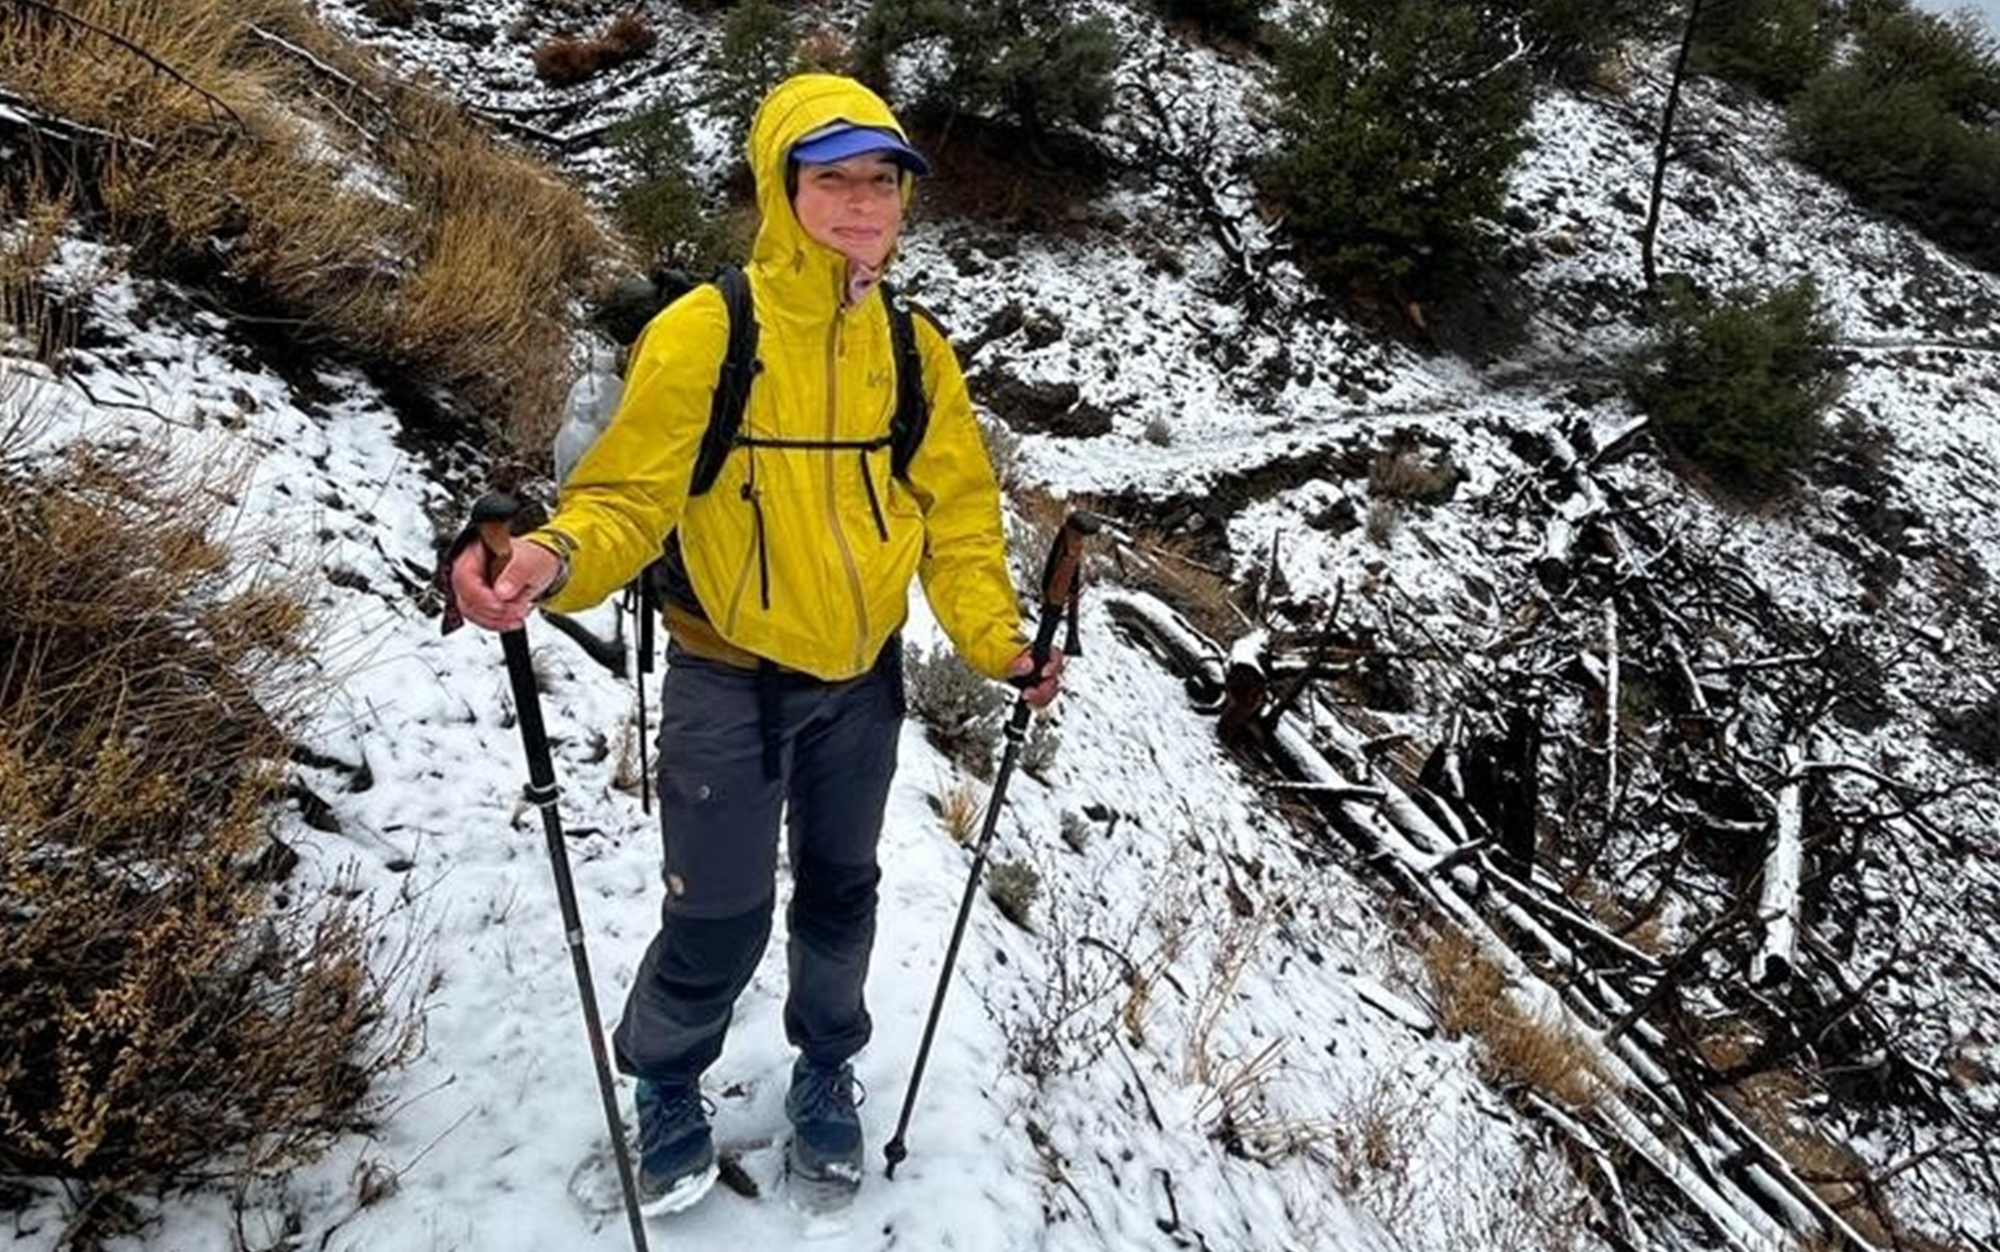 Having appropriate gear for the season and the trail’s conditions is a top priority on long-distance hikes.